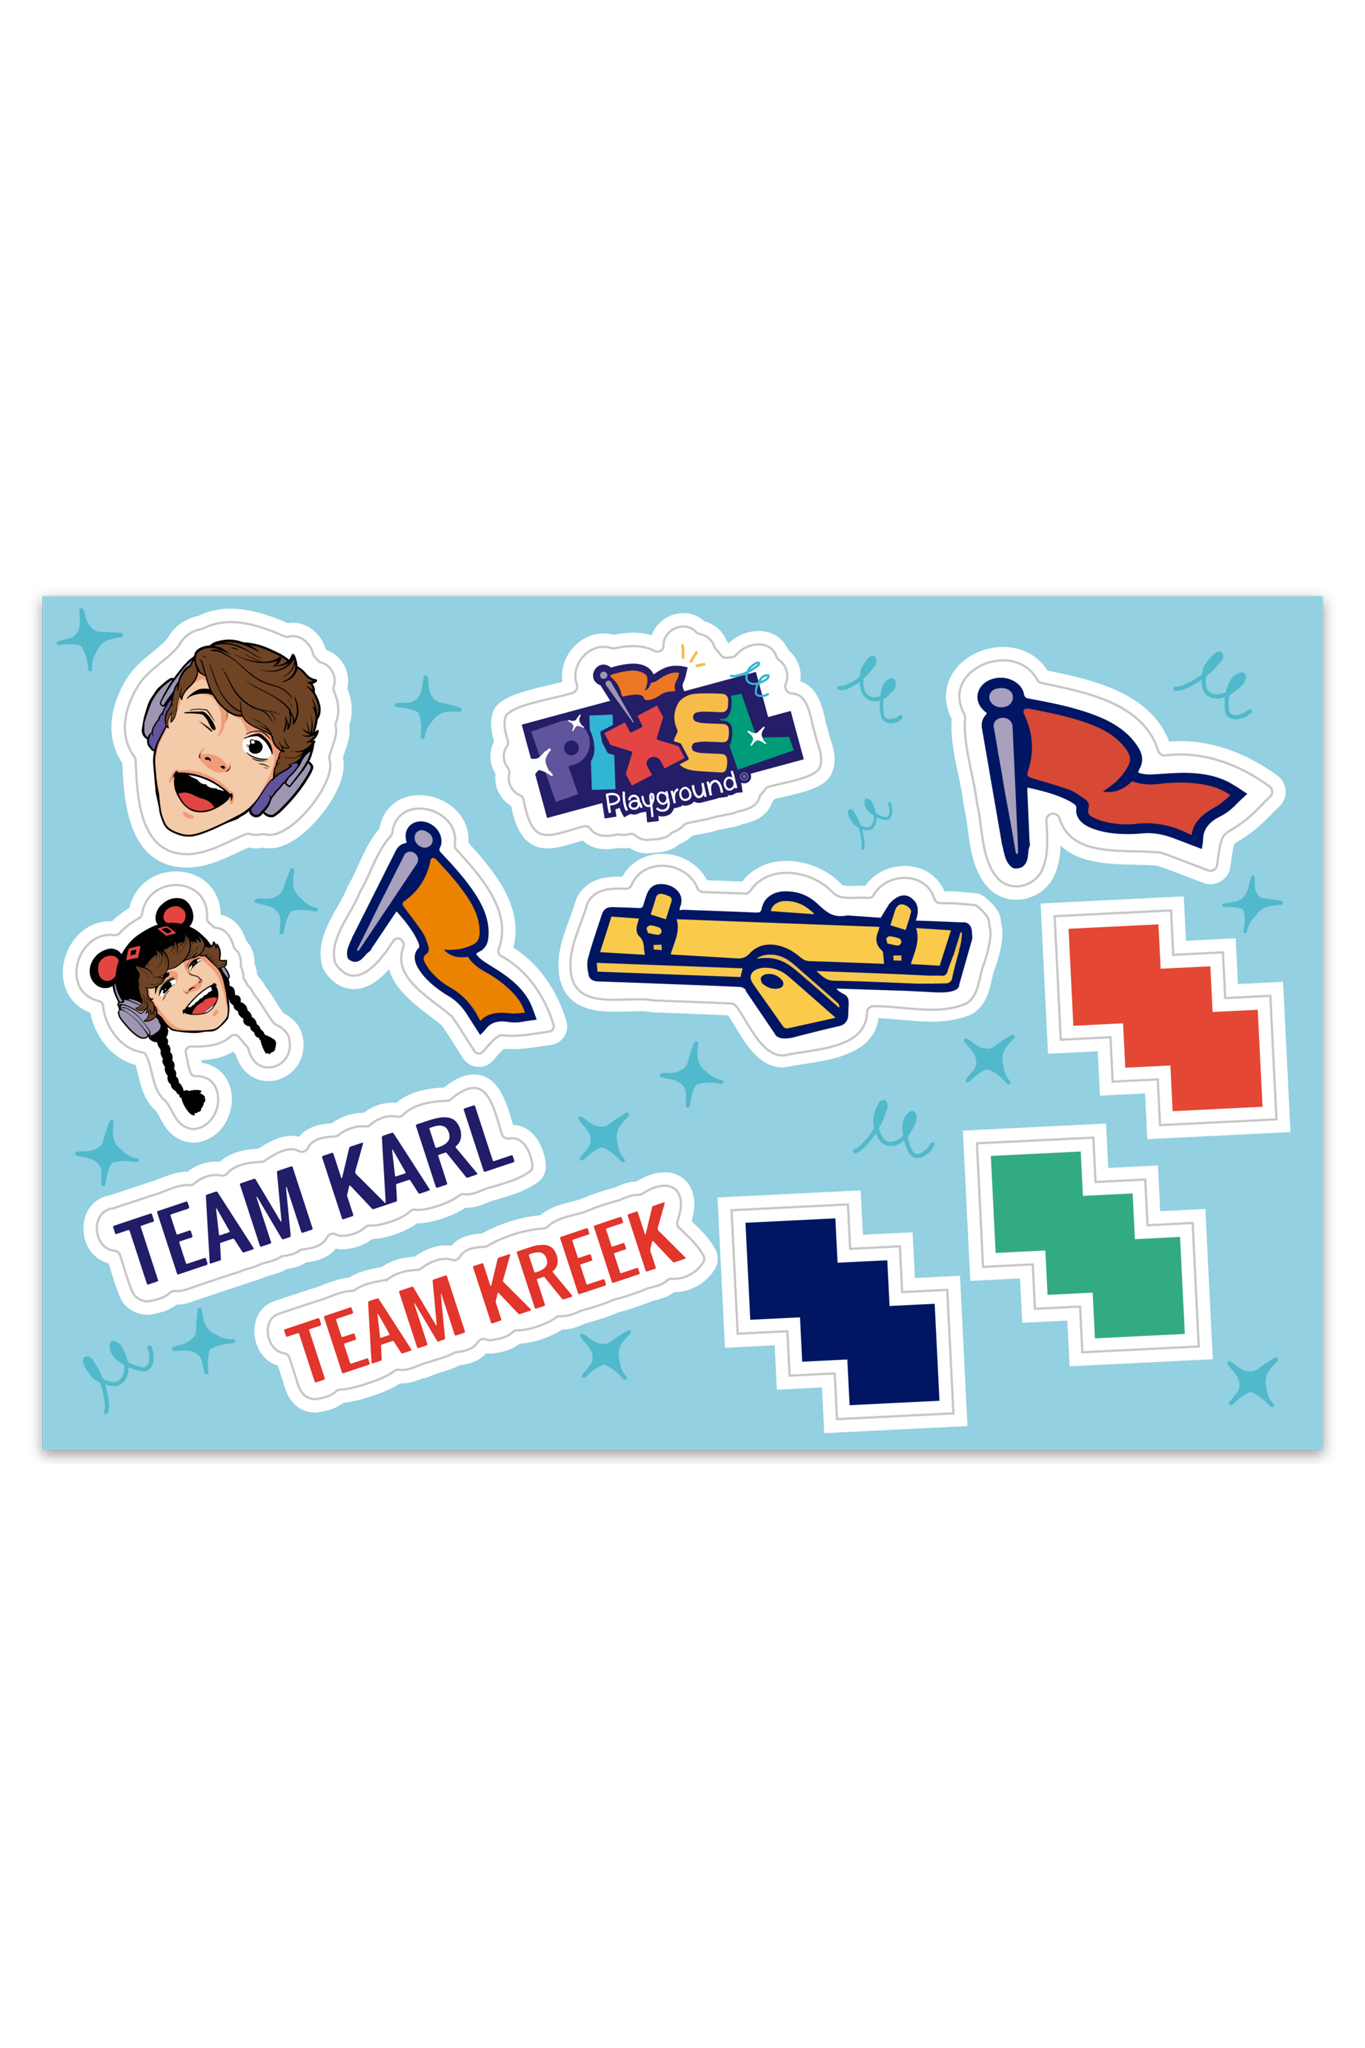 Sticker sheet related to "PIXEL Playground" featuring cartoon-style sticker designs. It includes illustrated faces of Karl and Kreek, with "TEAM KARL" and "TEAM KREEK" stickers, as well as PIXEL Playground logo, pixelated shapes, and gaming icons like a joystick and flags, all set against a light blue background with subtle decorative elements.